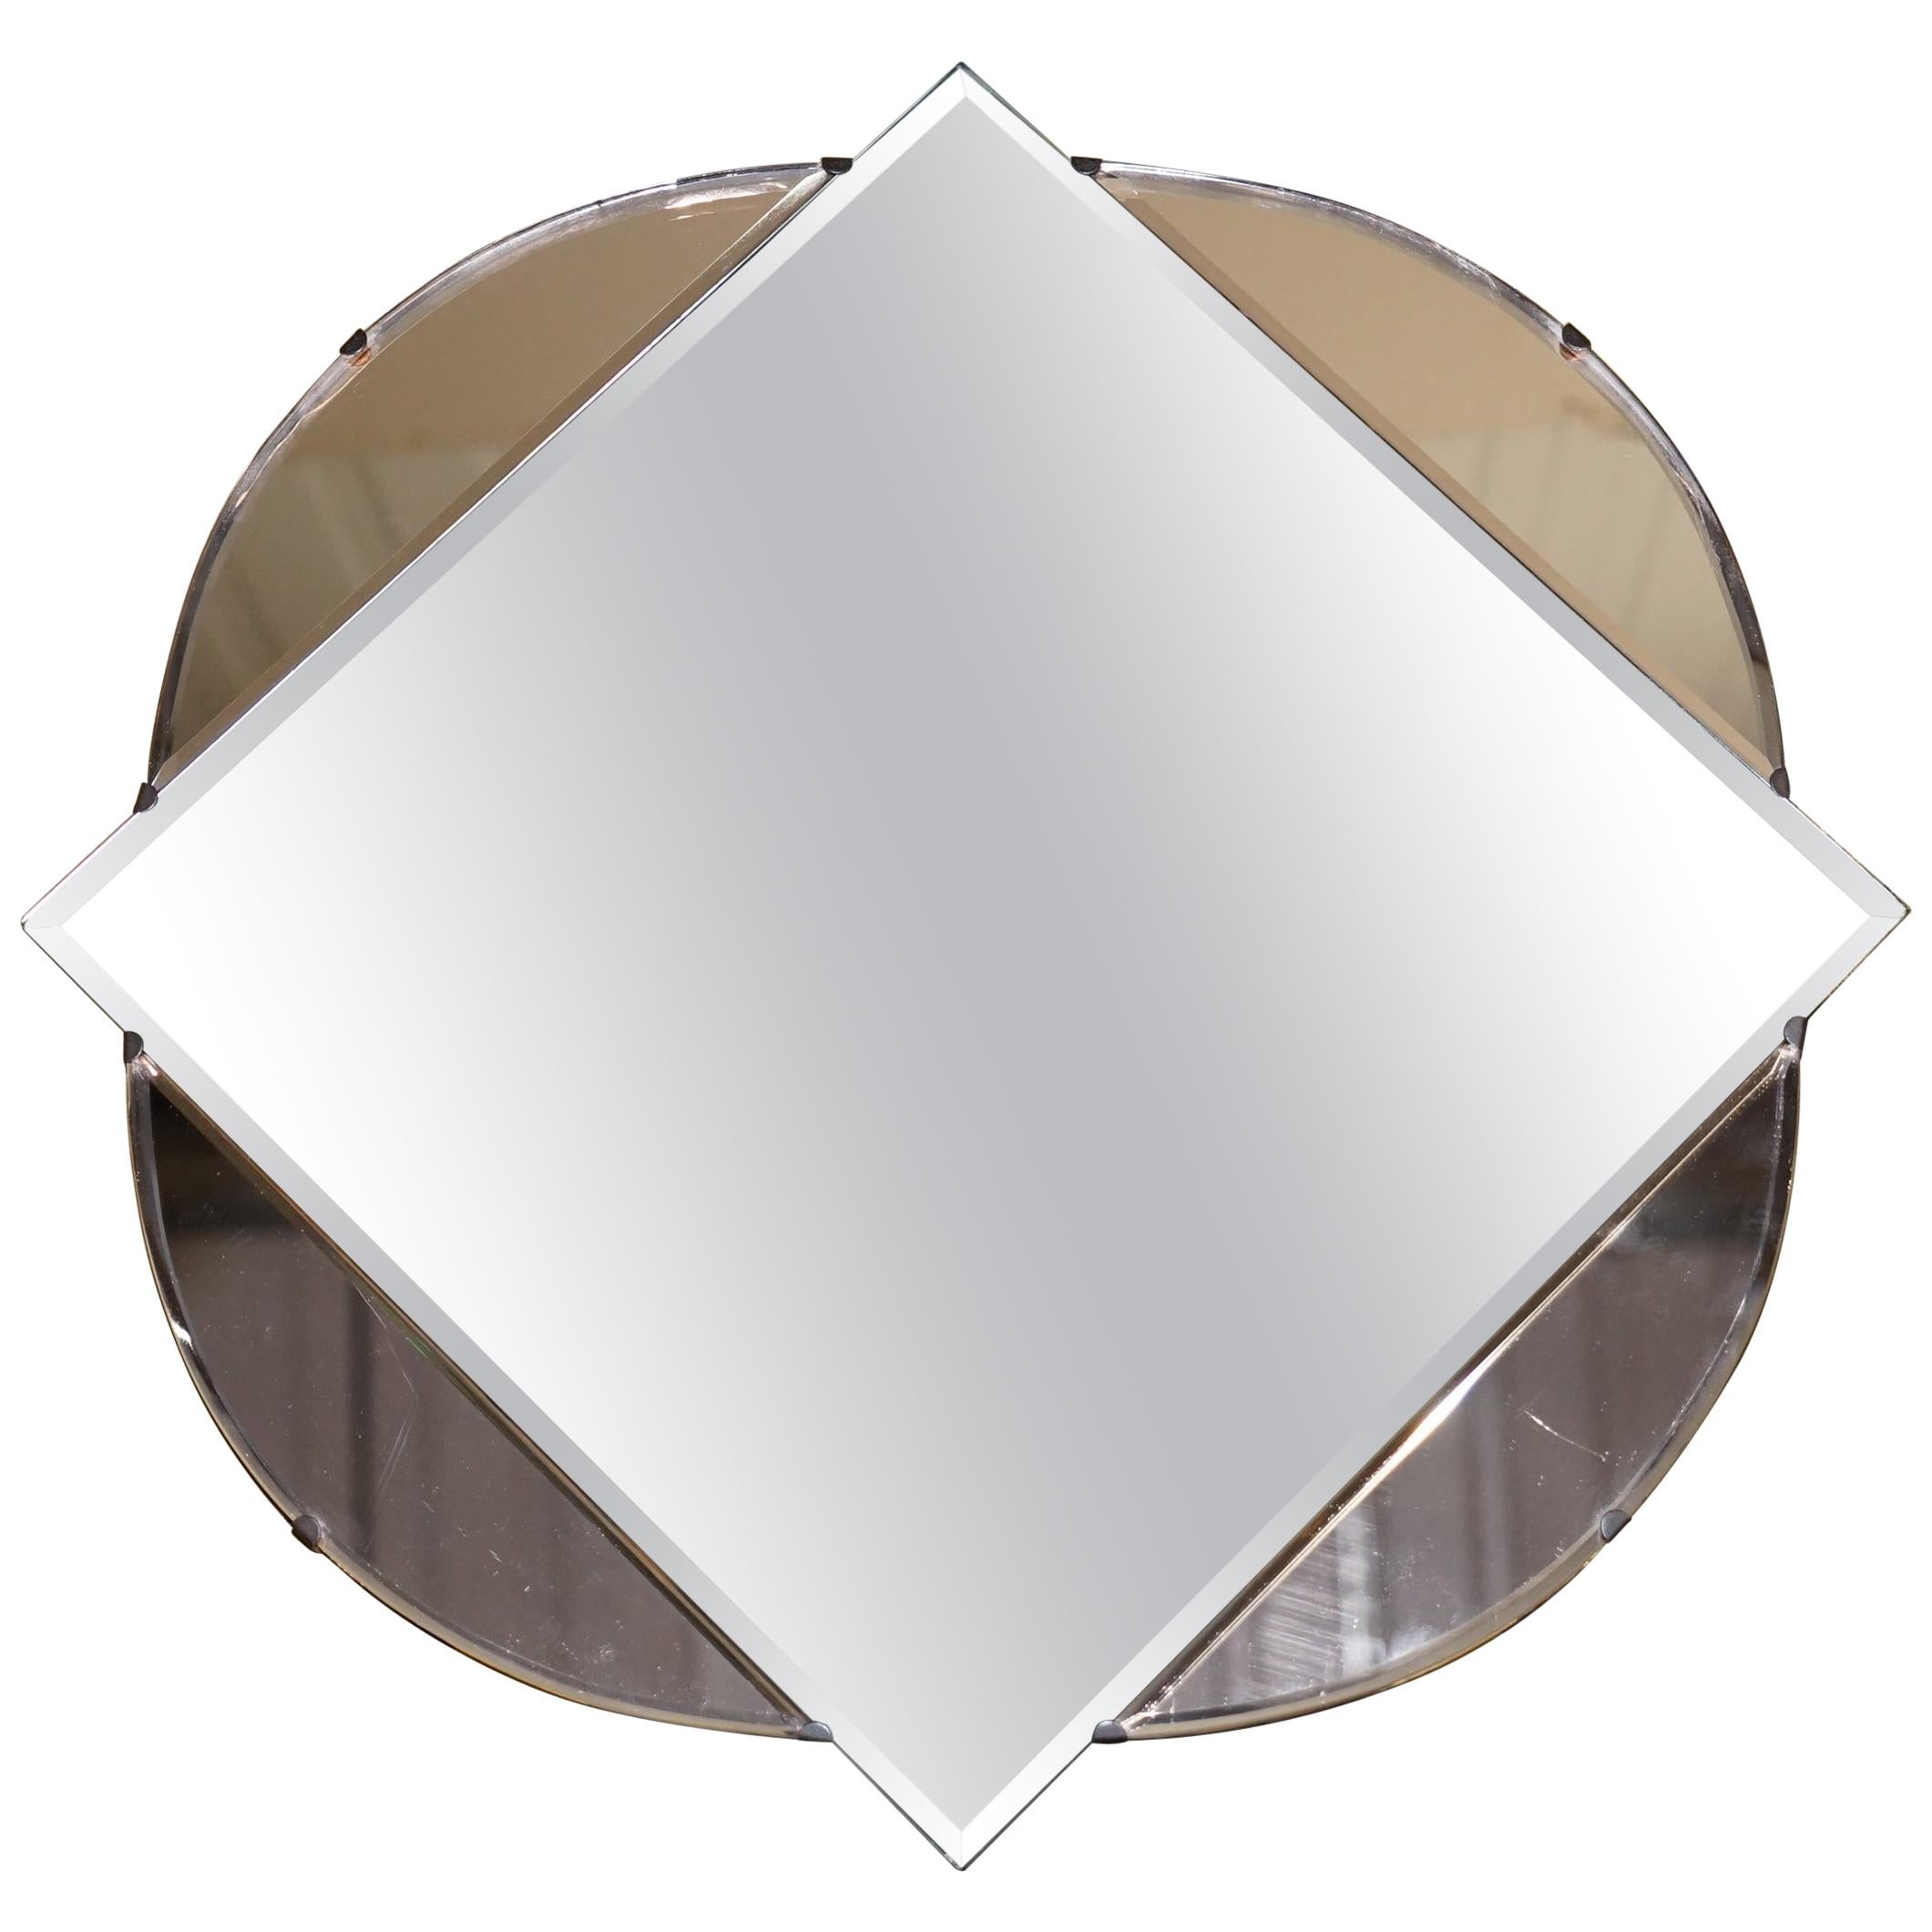 Lovely 1930s French Art Deco Beveled Mirror with Square Inside Circle Rare